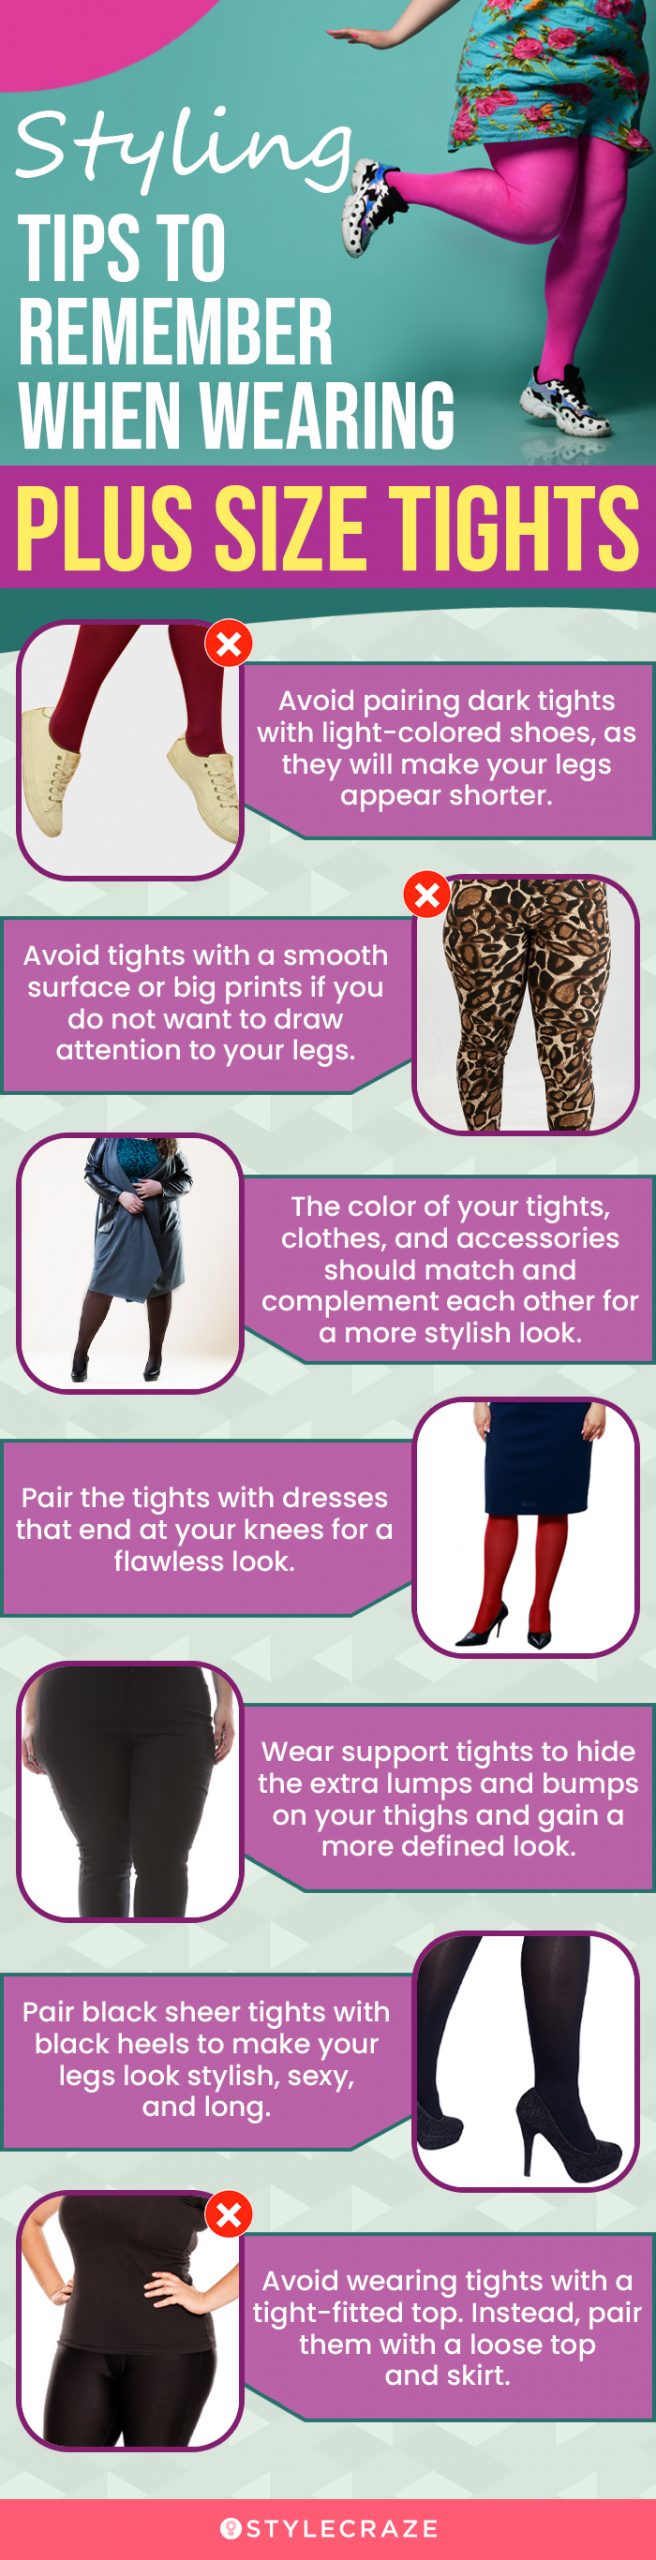 Style Tips To Remember When Wearing Plus Size Tights